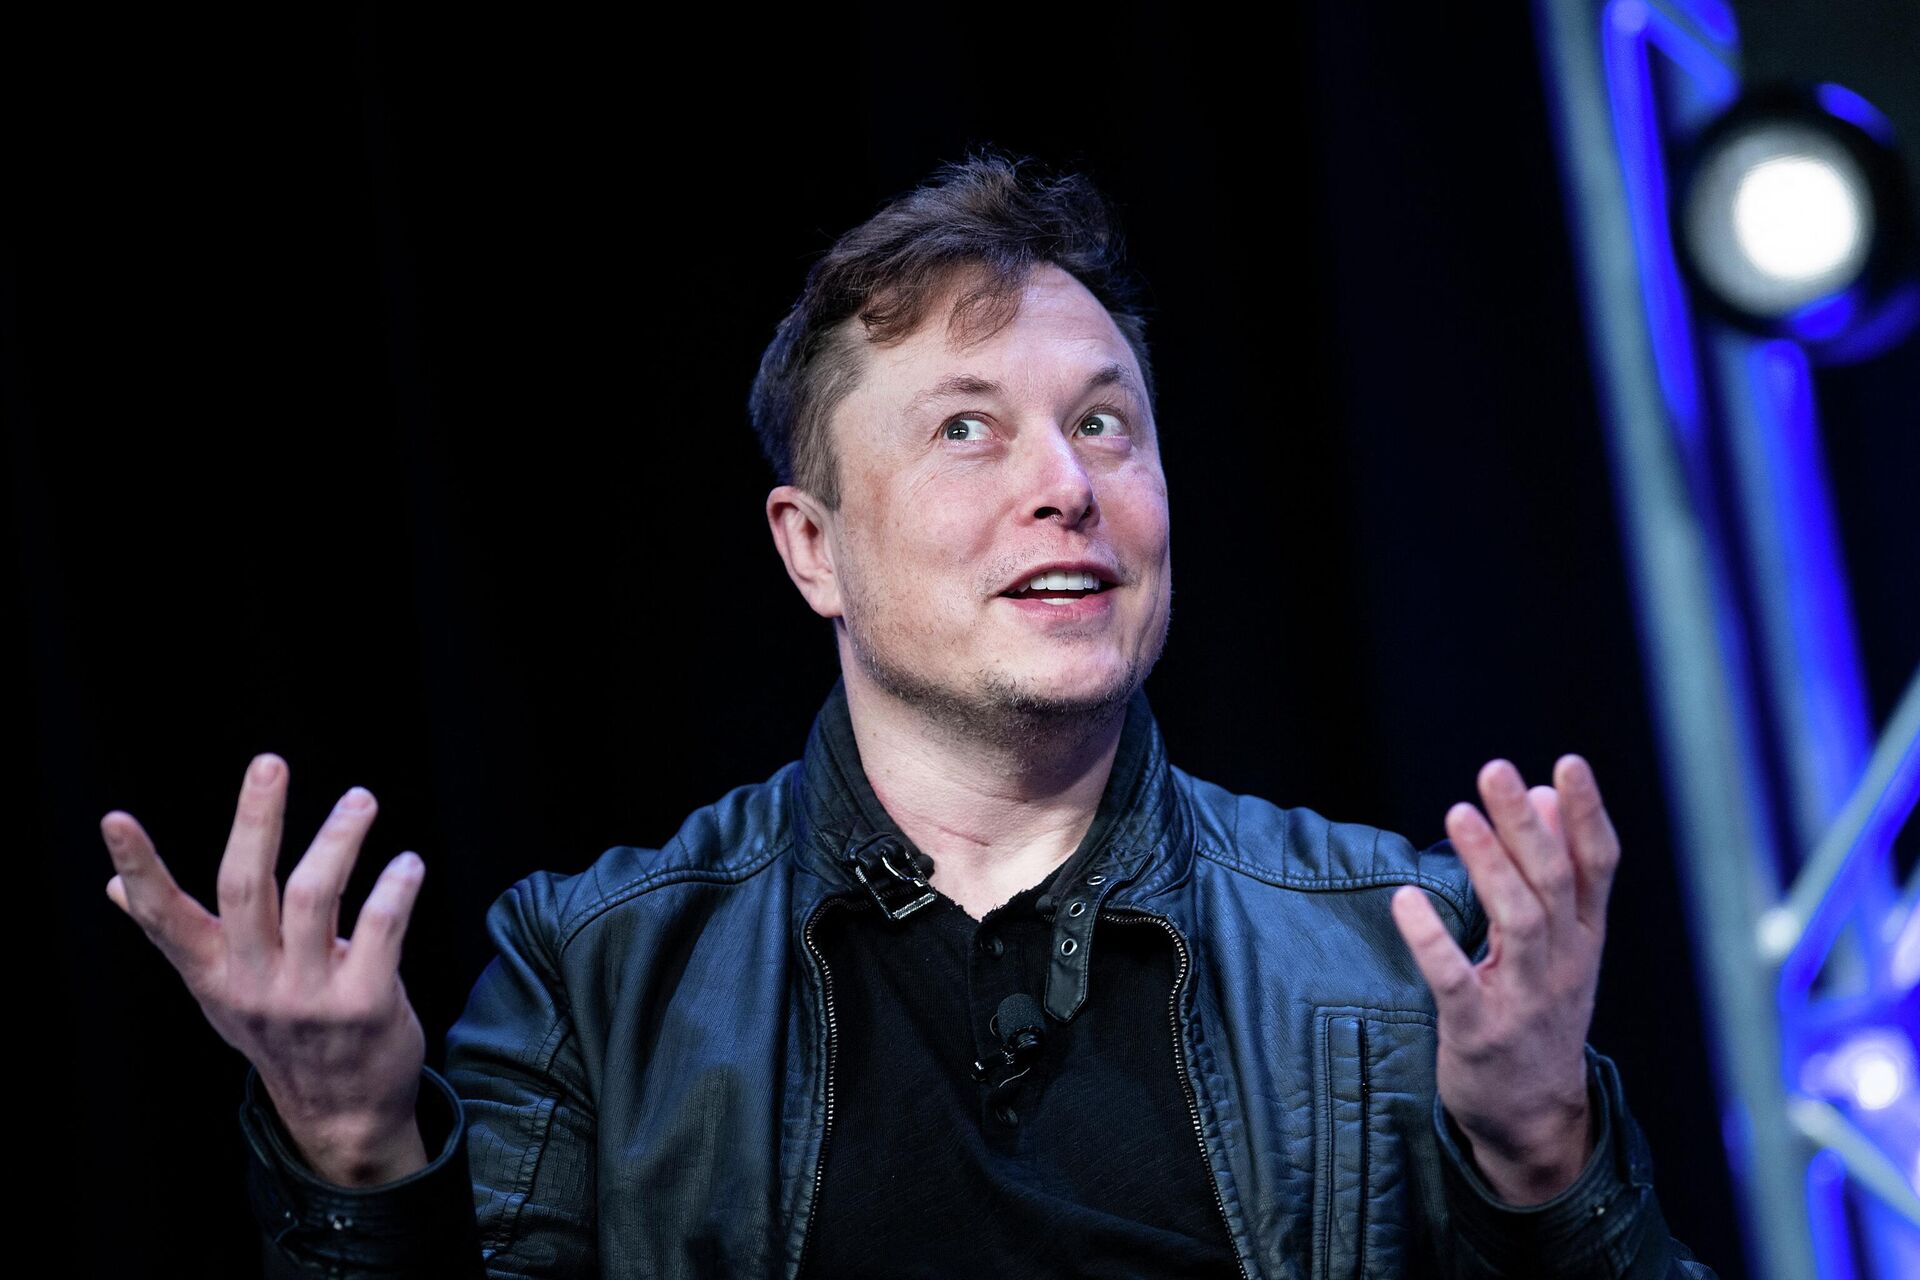 In this file photo taken on March 9, 2020 Elon Musk, founder of SpaceX, speaks during the Satellite 2020 at the Washington Convention Center in Washington, DC - Sputnik International, 1920, 08.05.2022